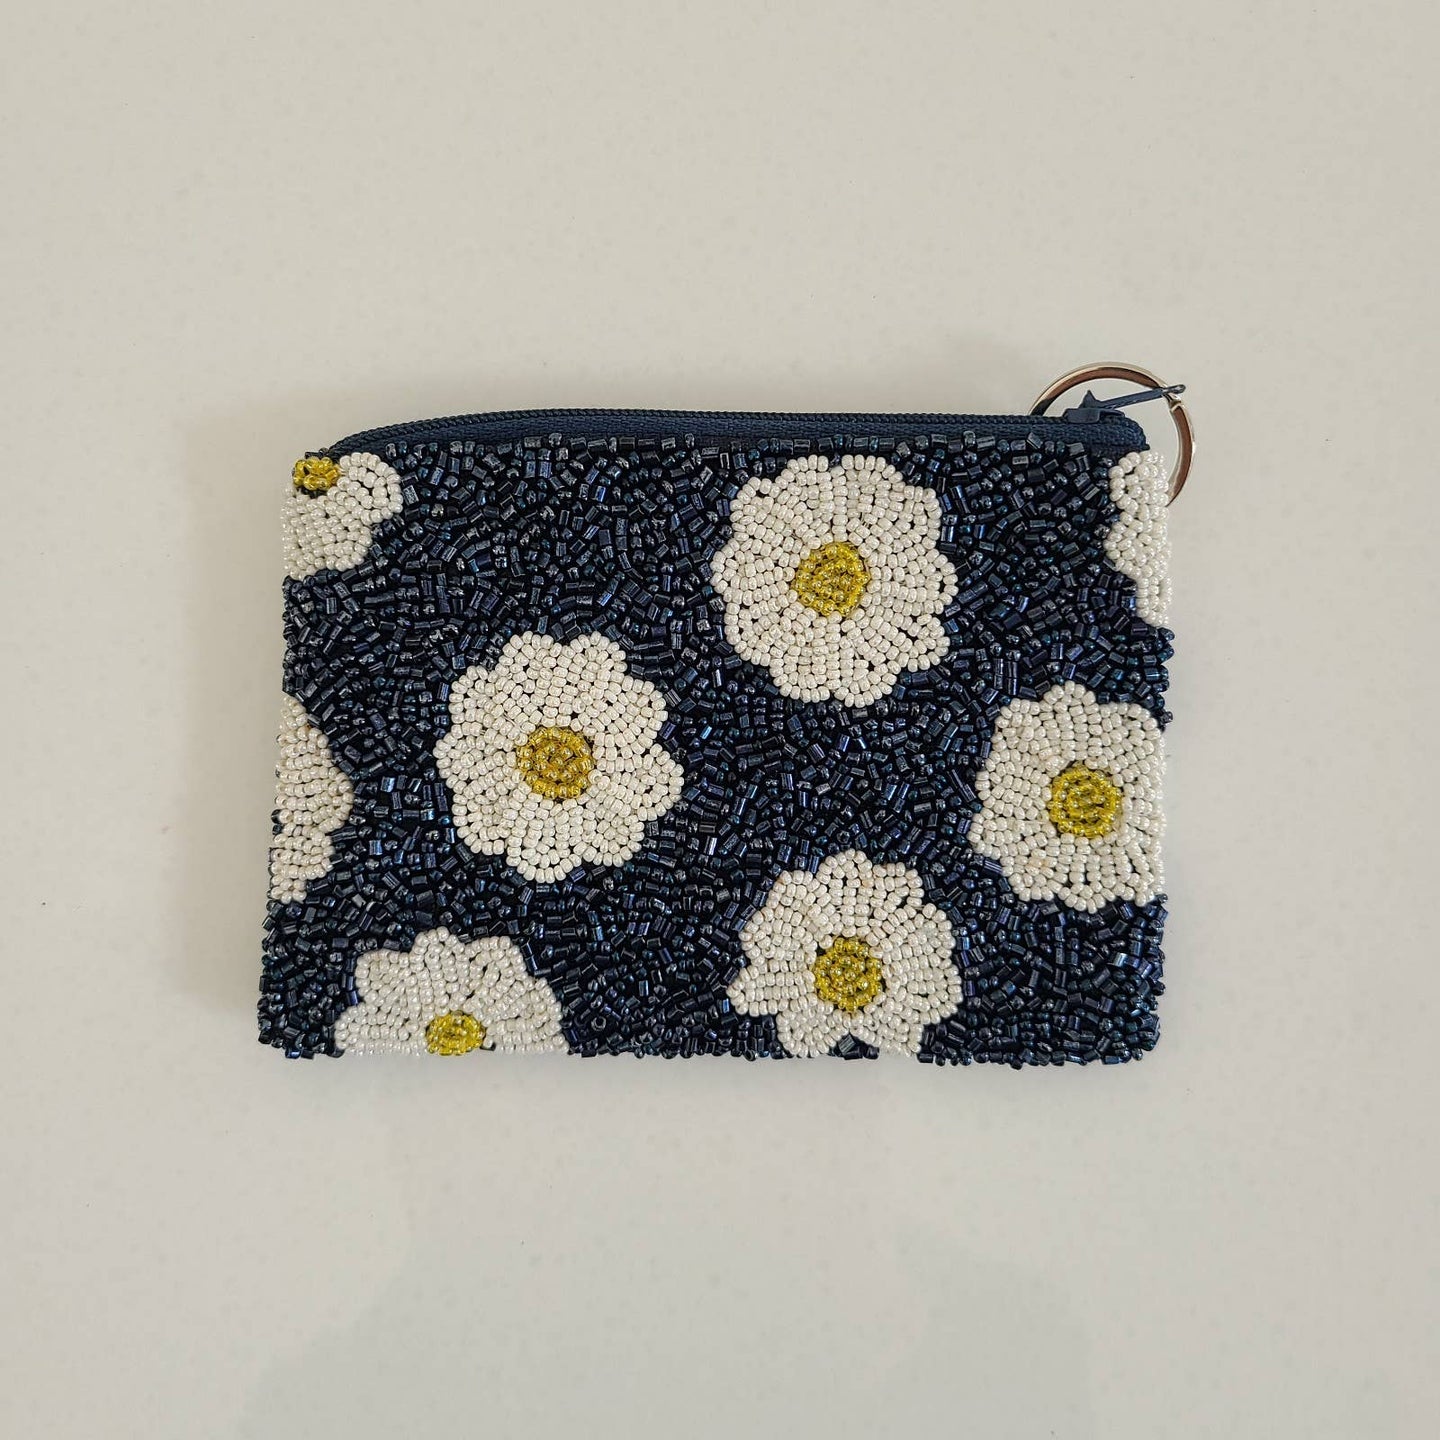 Tiana Designs Beaded Coin Purse - Daisies (2 colors)